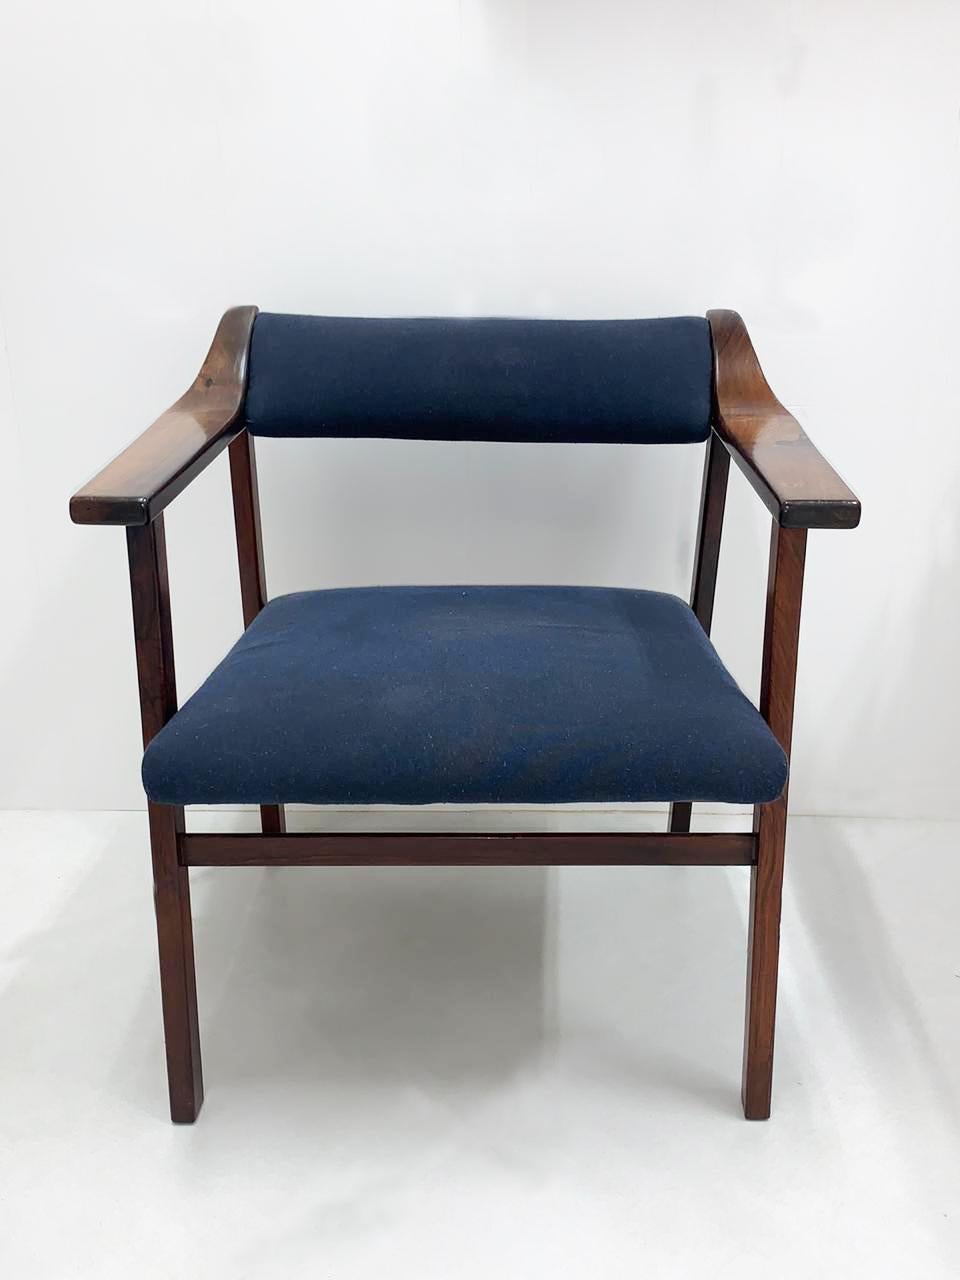 Mid-Century Modern armchair attributed to the Brazilian master designer Joaquim Tenreiro. This lounge chair is made of solid rosewood in the 1960's with a new reupholstered blue covering. A total of 2 are available.